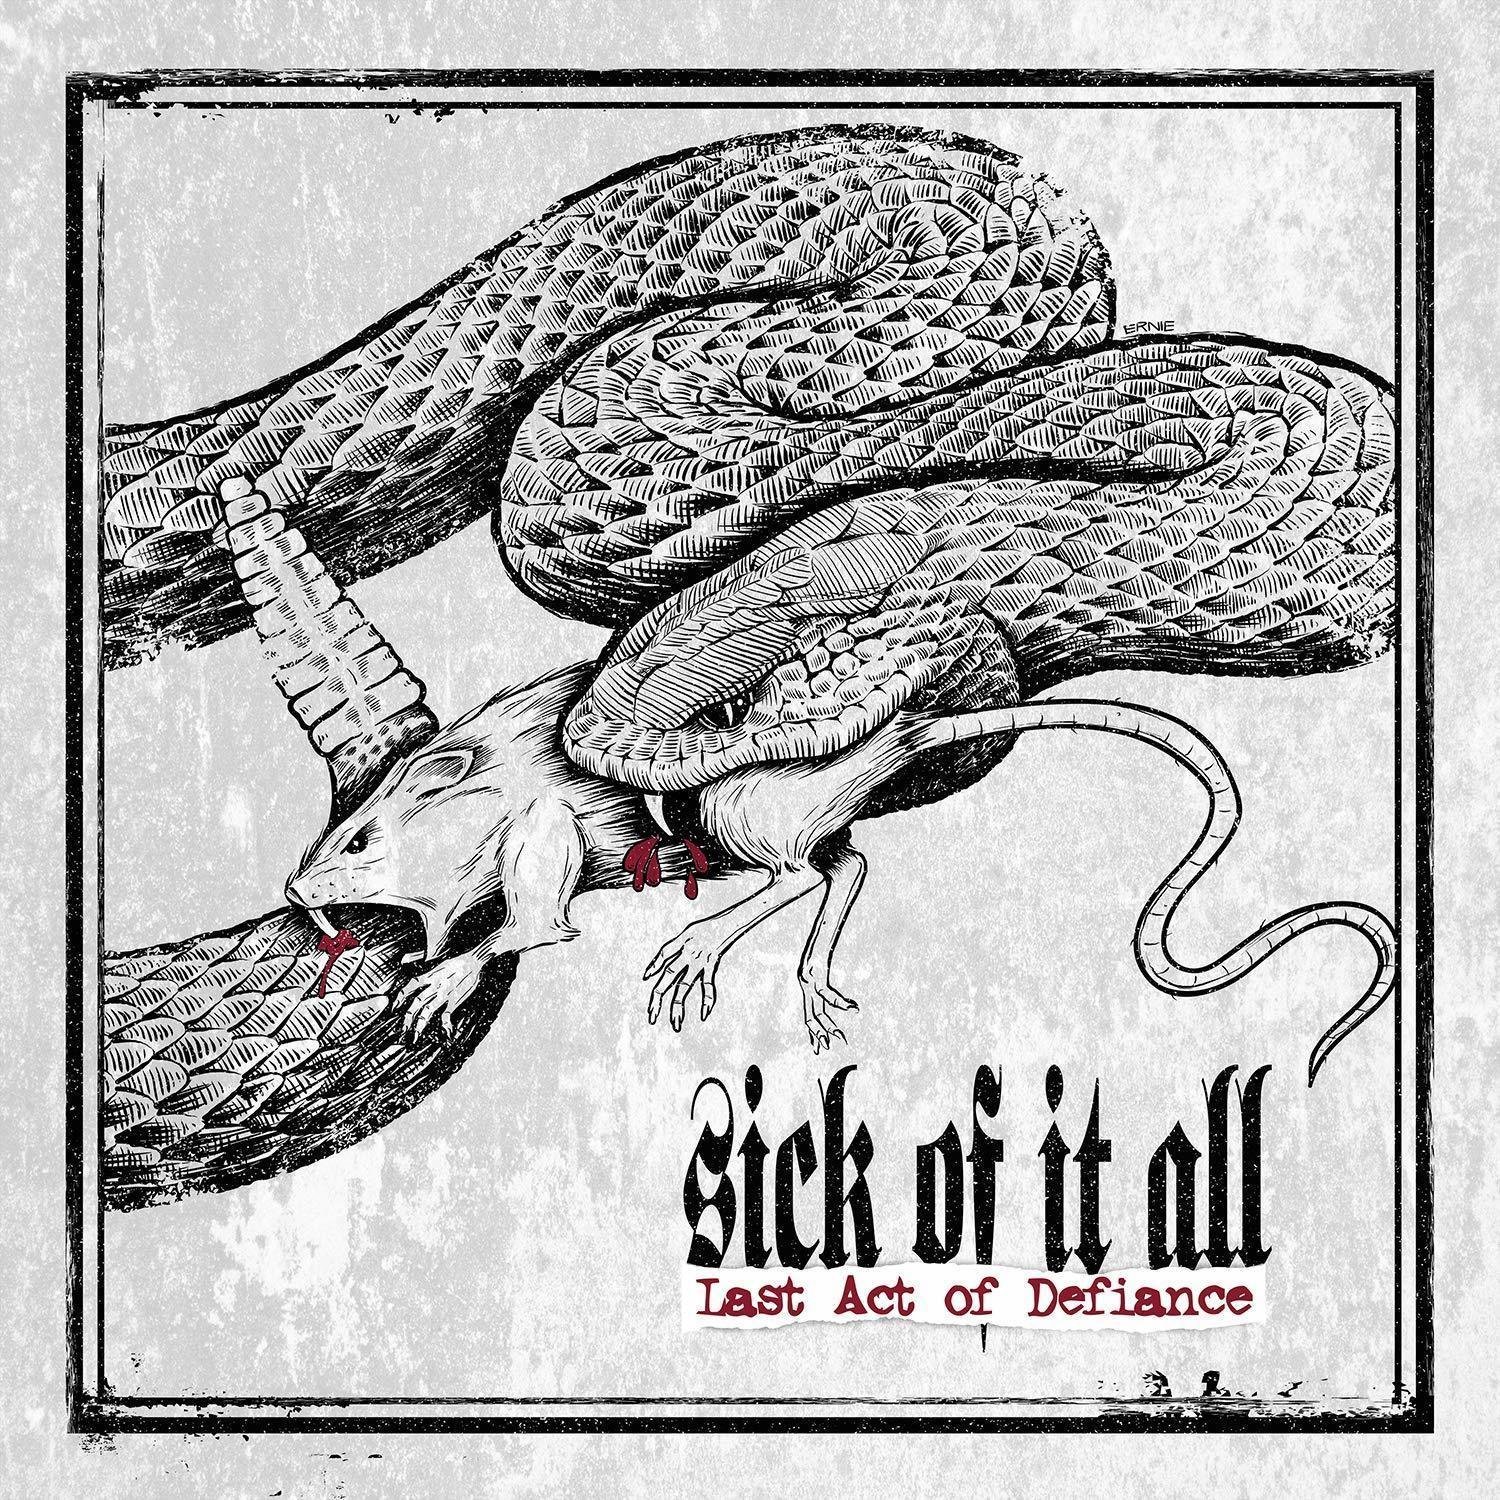 Vinylplade Sick Of It All - Last Act Of Defiance (Limited Edition) (Grey Coloured) (LP)